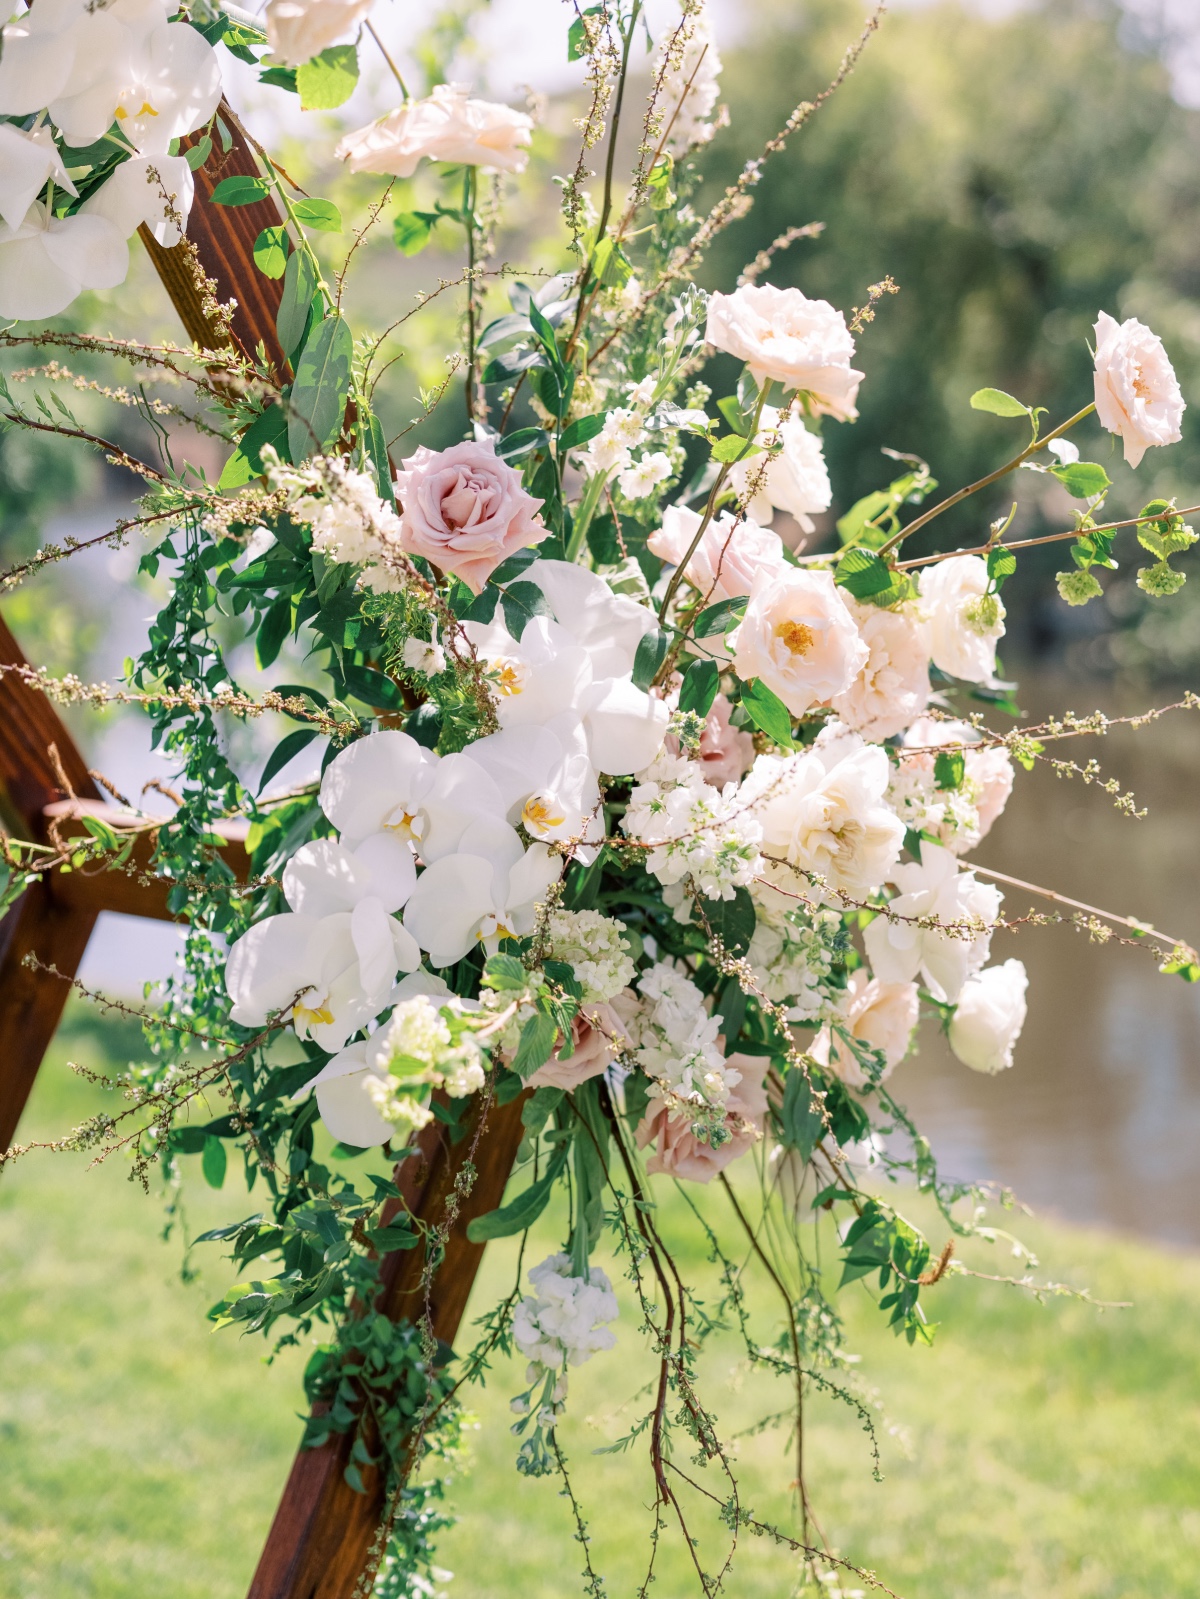 This Cali Vineyard Wedding Has The Most Romantic First-Look Location We've Ever Seen